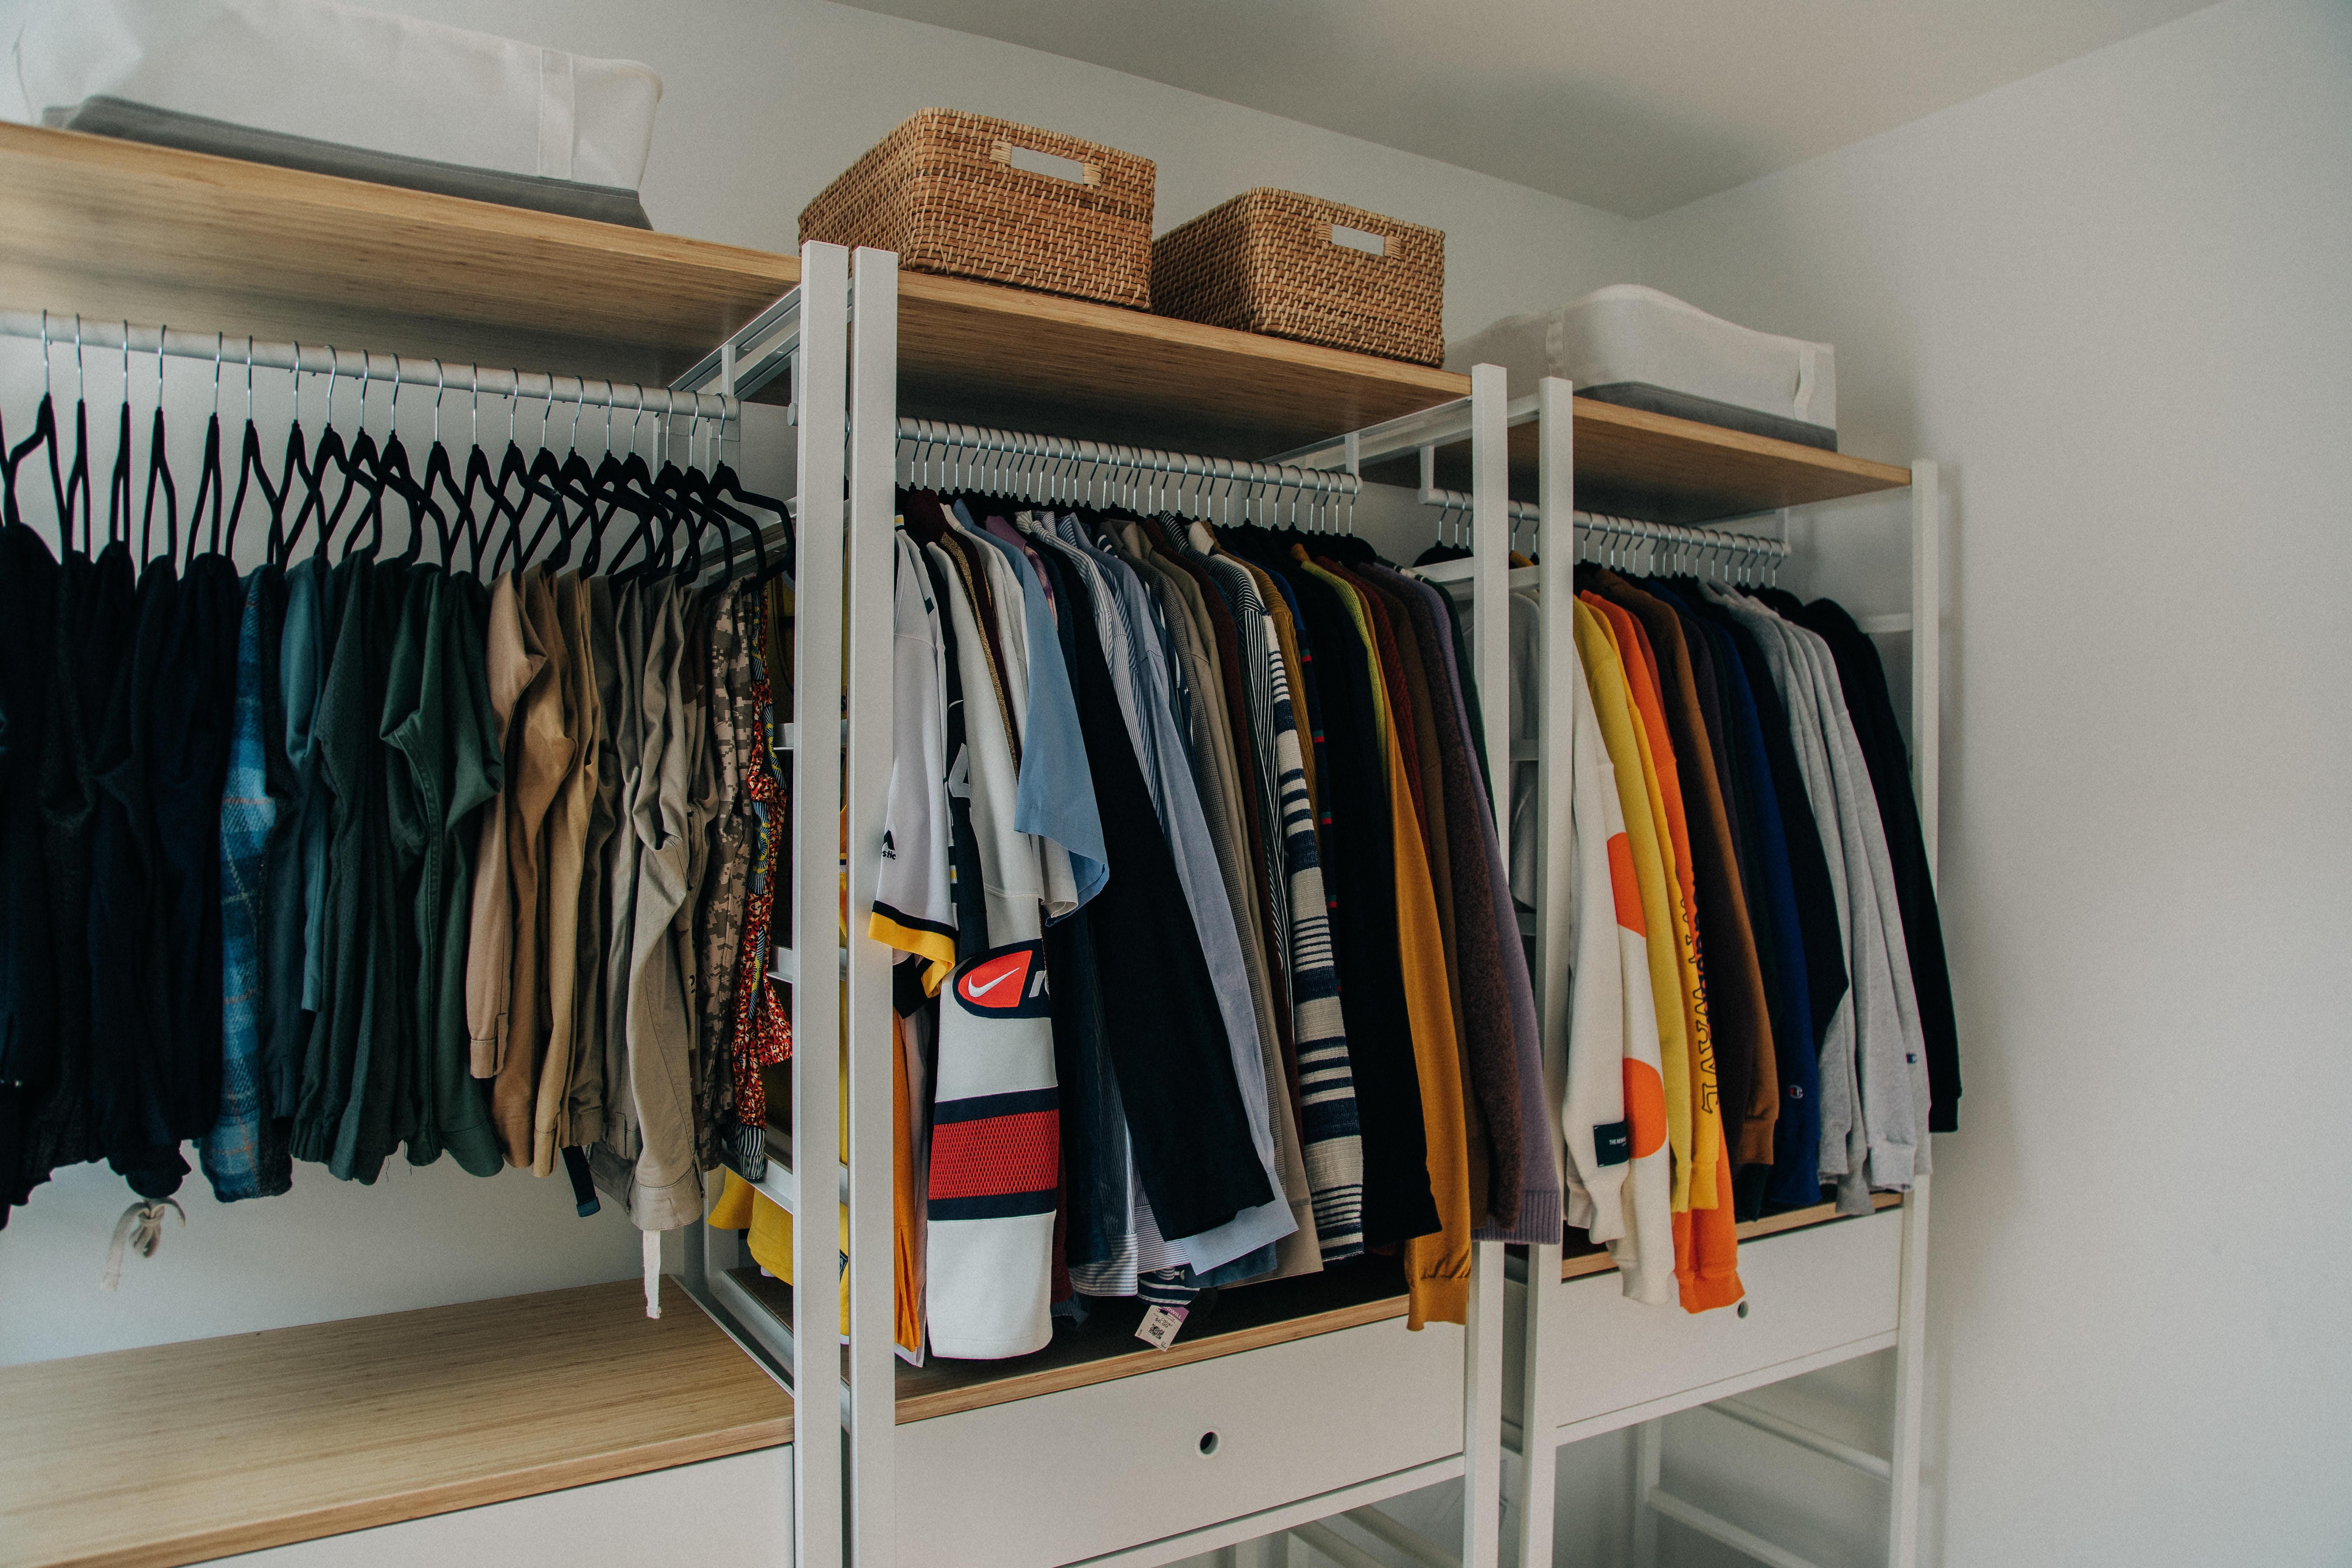 How to Organize your Home: 5 Tips from Personal Organizers - Decorilla